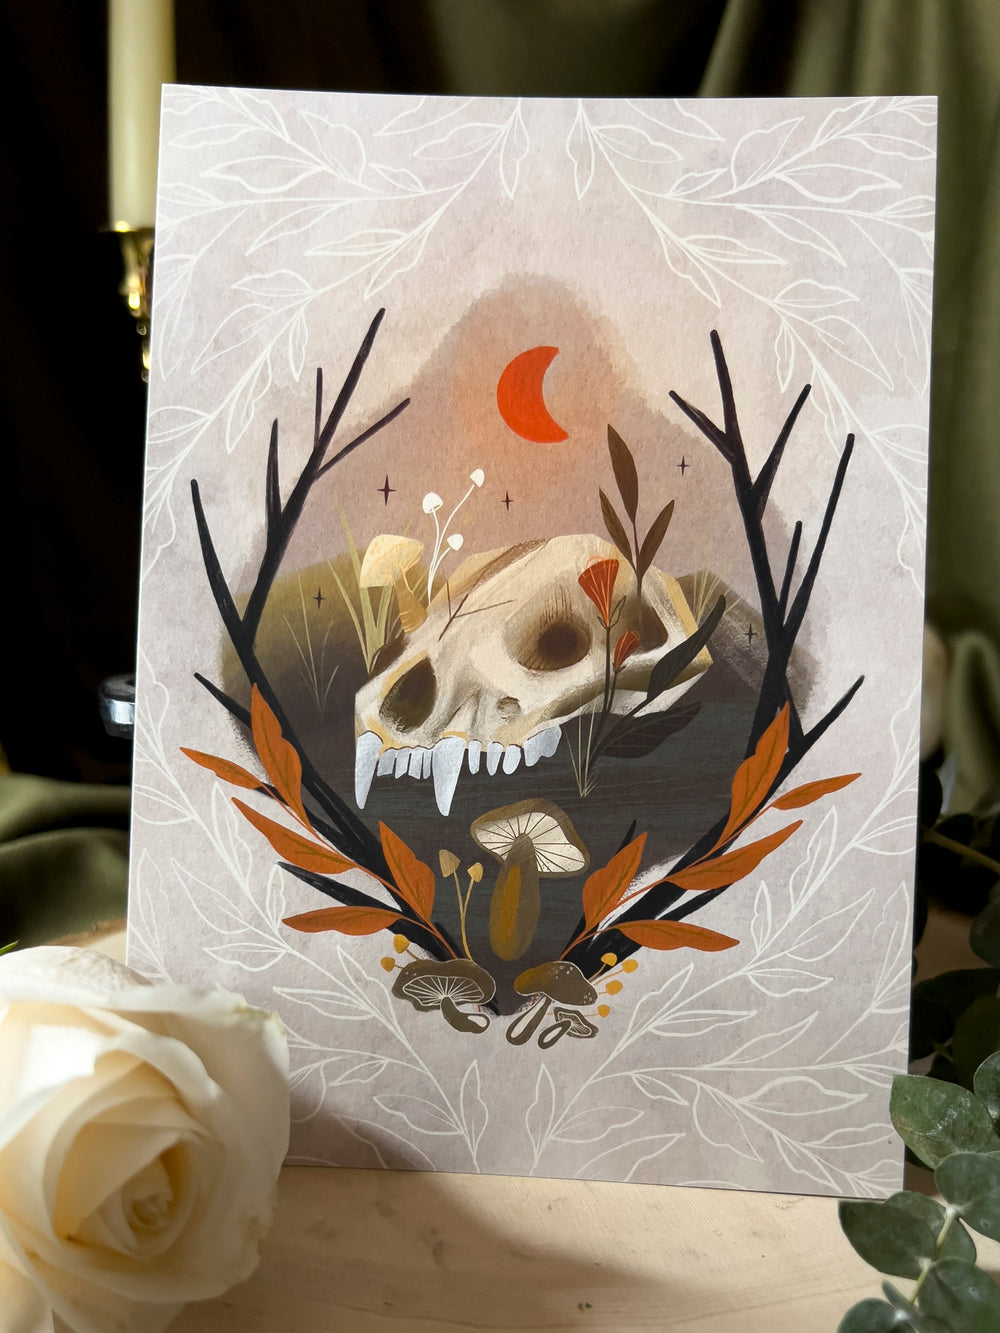 An art print depicting an animal skull on the ground beneath a red crescent moon.